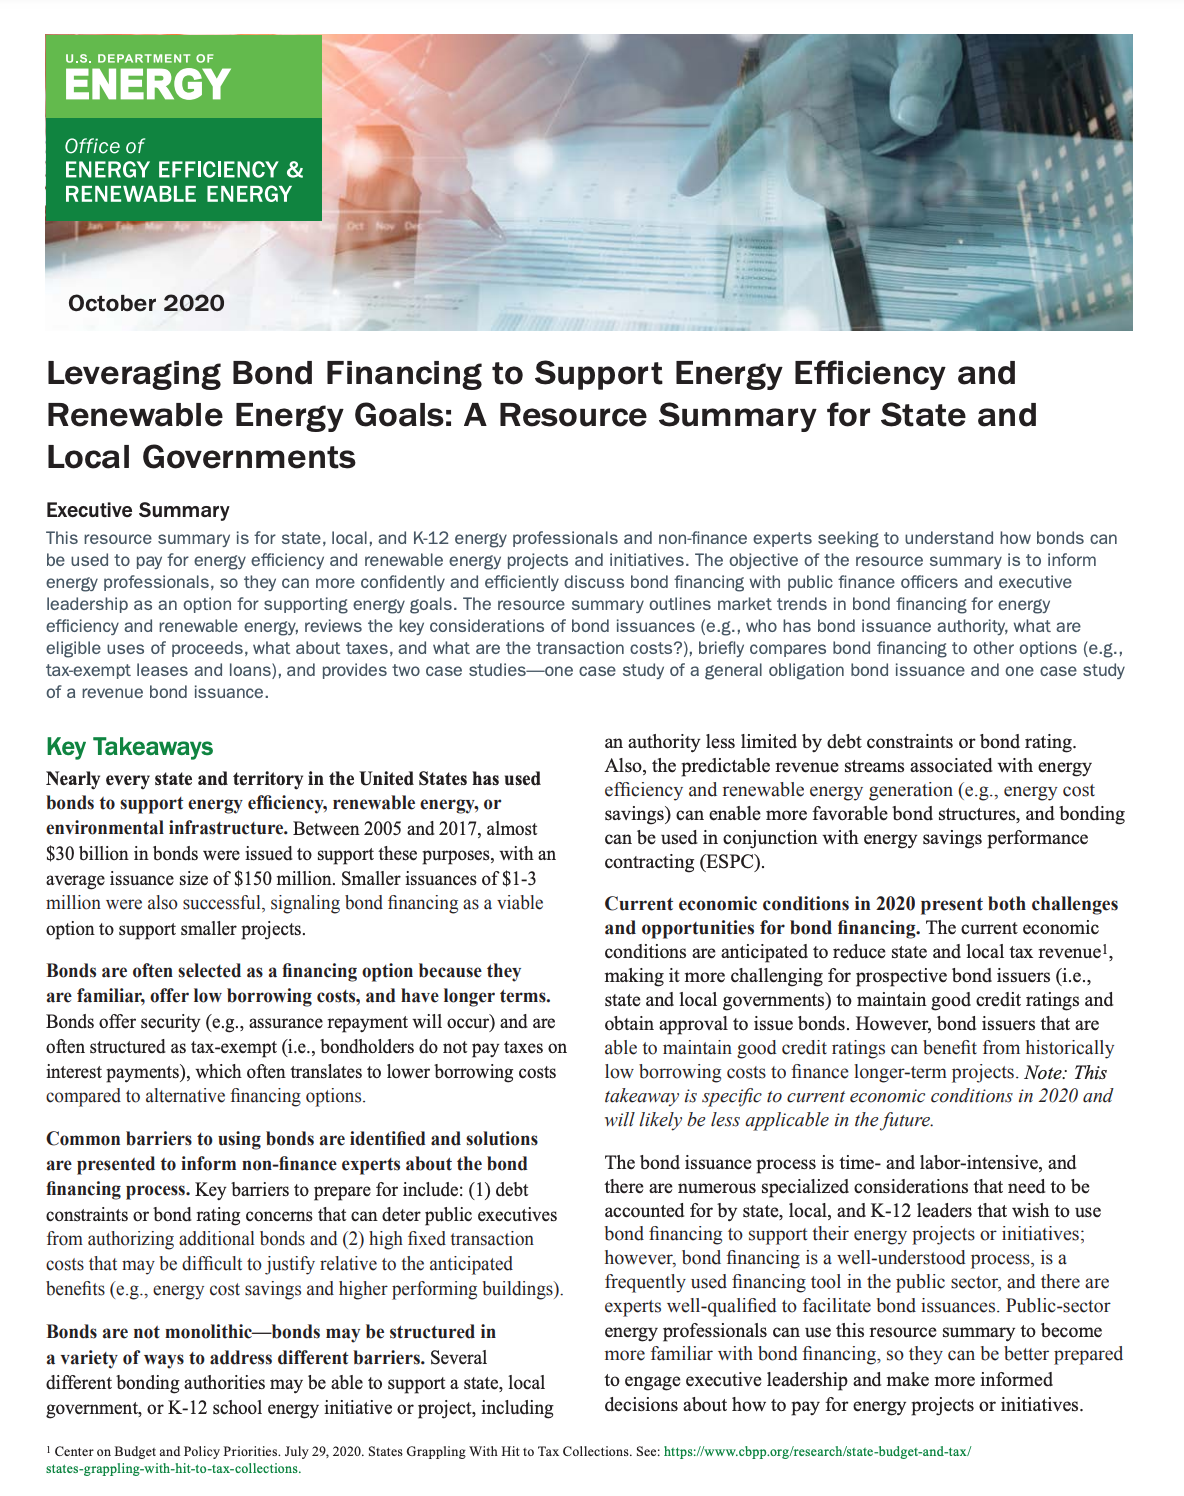 Cover page with key takeaways and title "Leveraging bond financing to support energy efficiency and renewable energy goals"